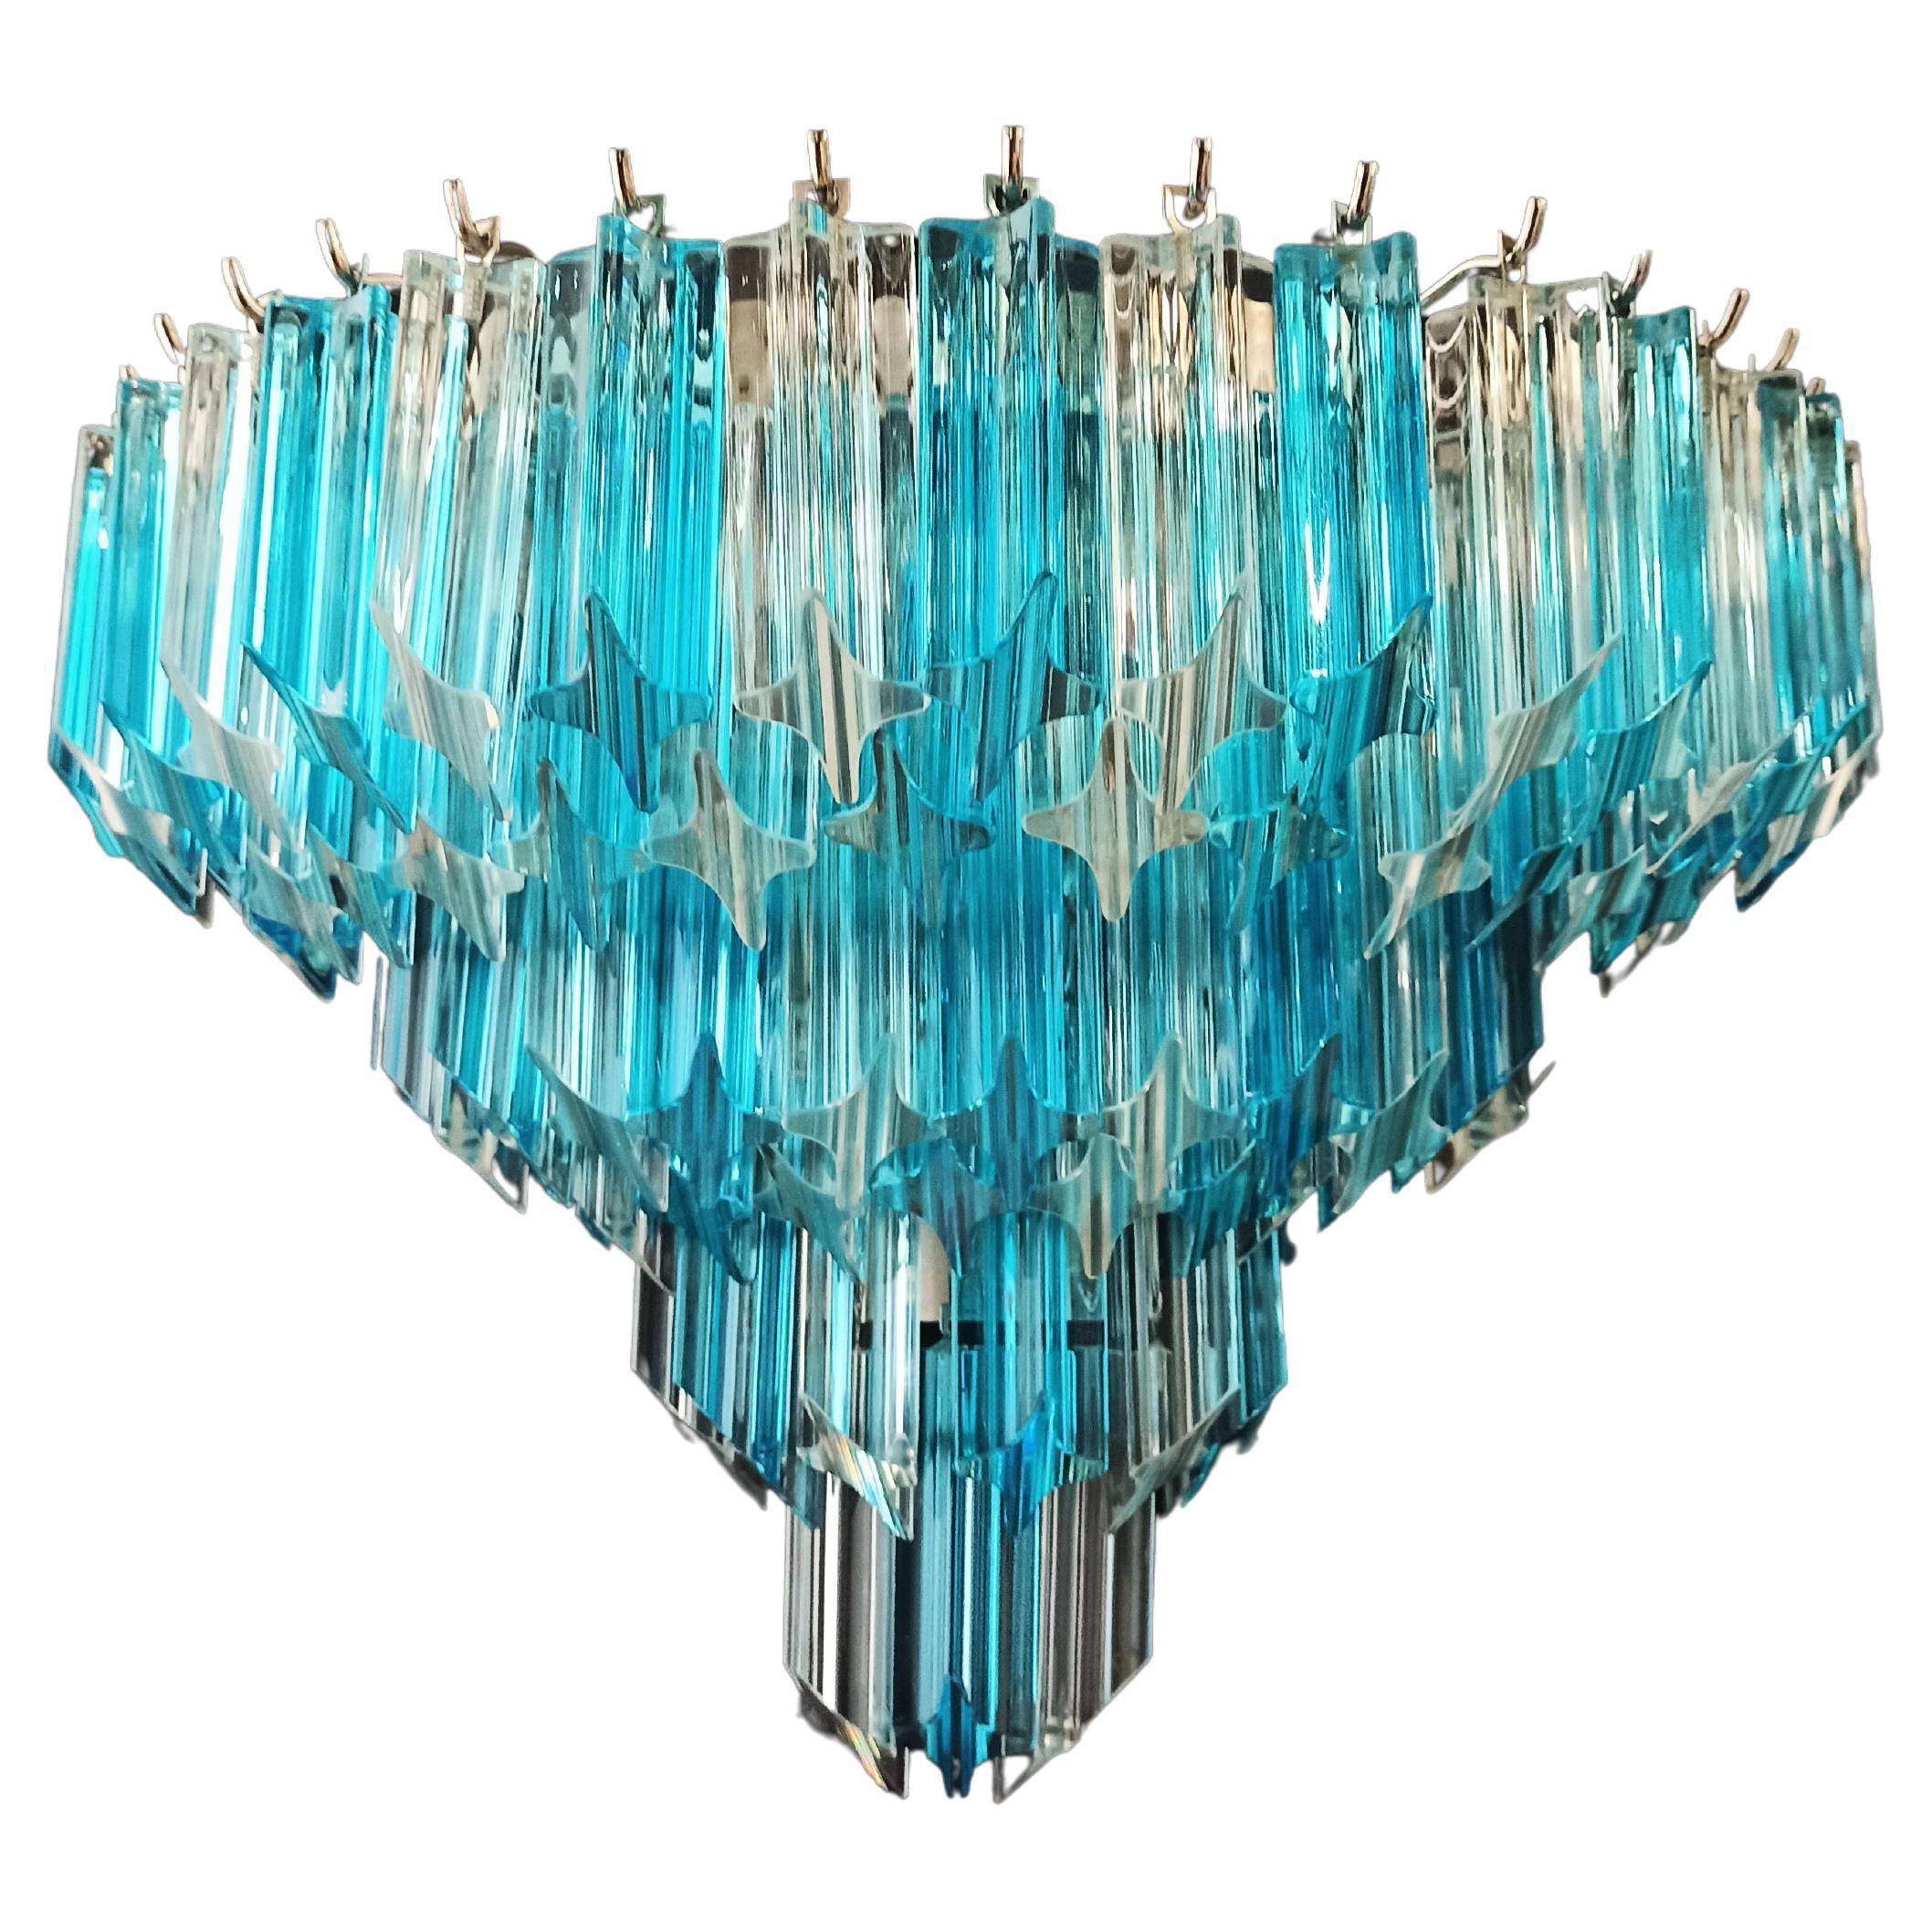 Pair of Vintage Murano Wall Sconce, 63 Clear and Blue Quadriedri